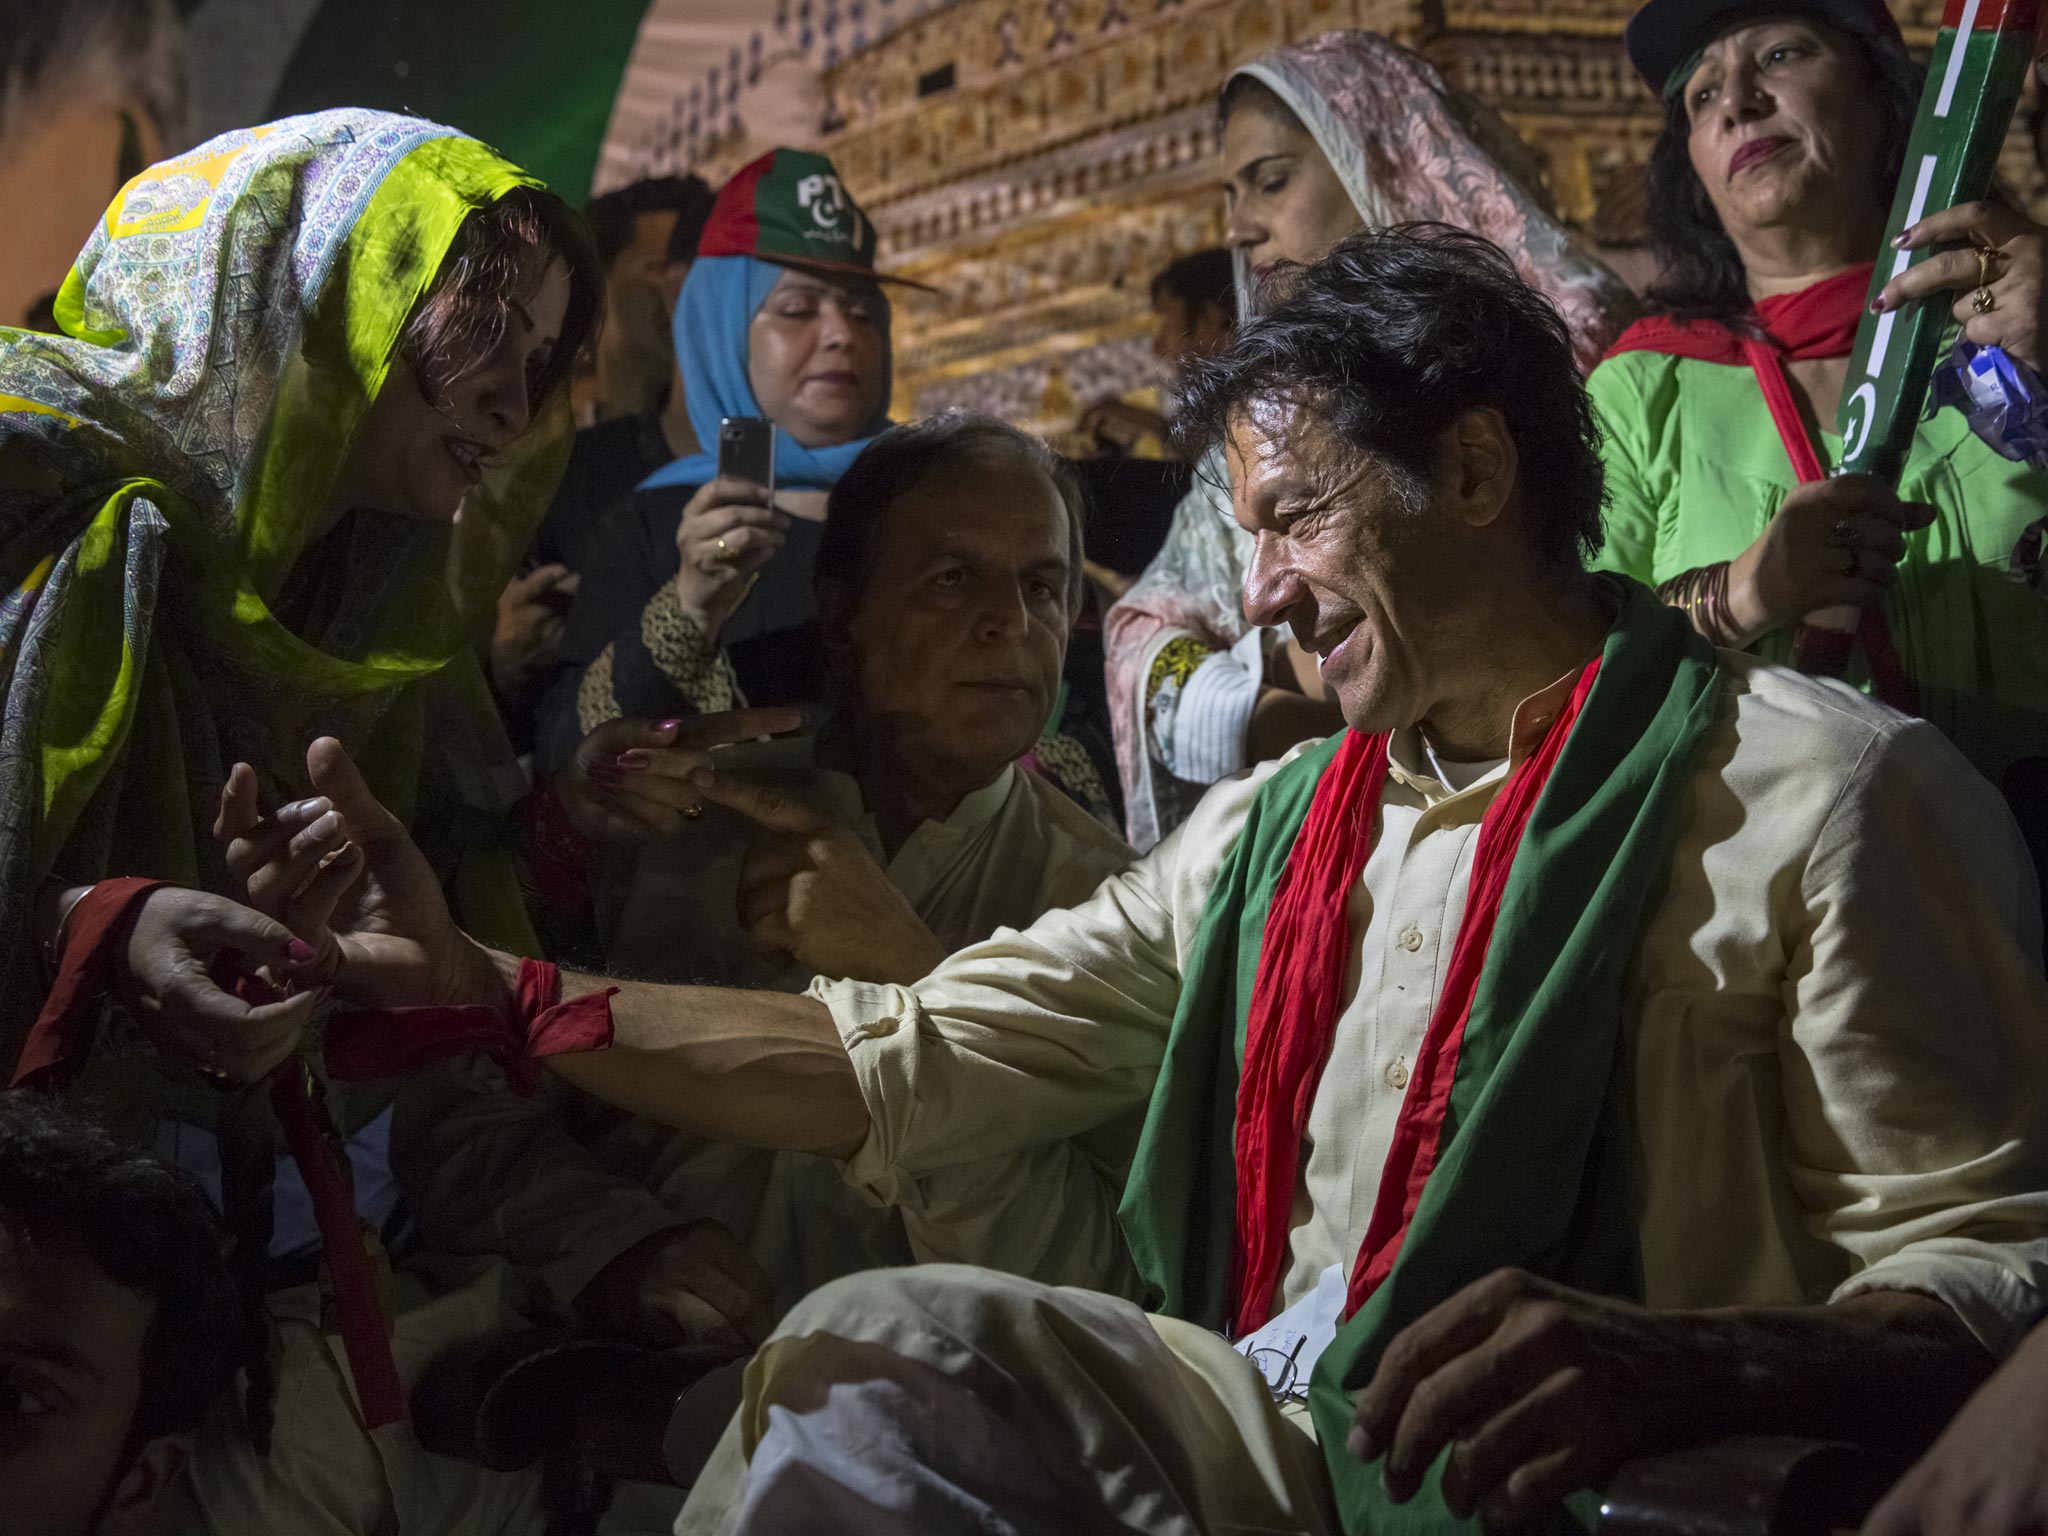 Former cricket legend and opposition leader Imran Khan at an election campaign rally last year